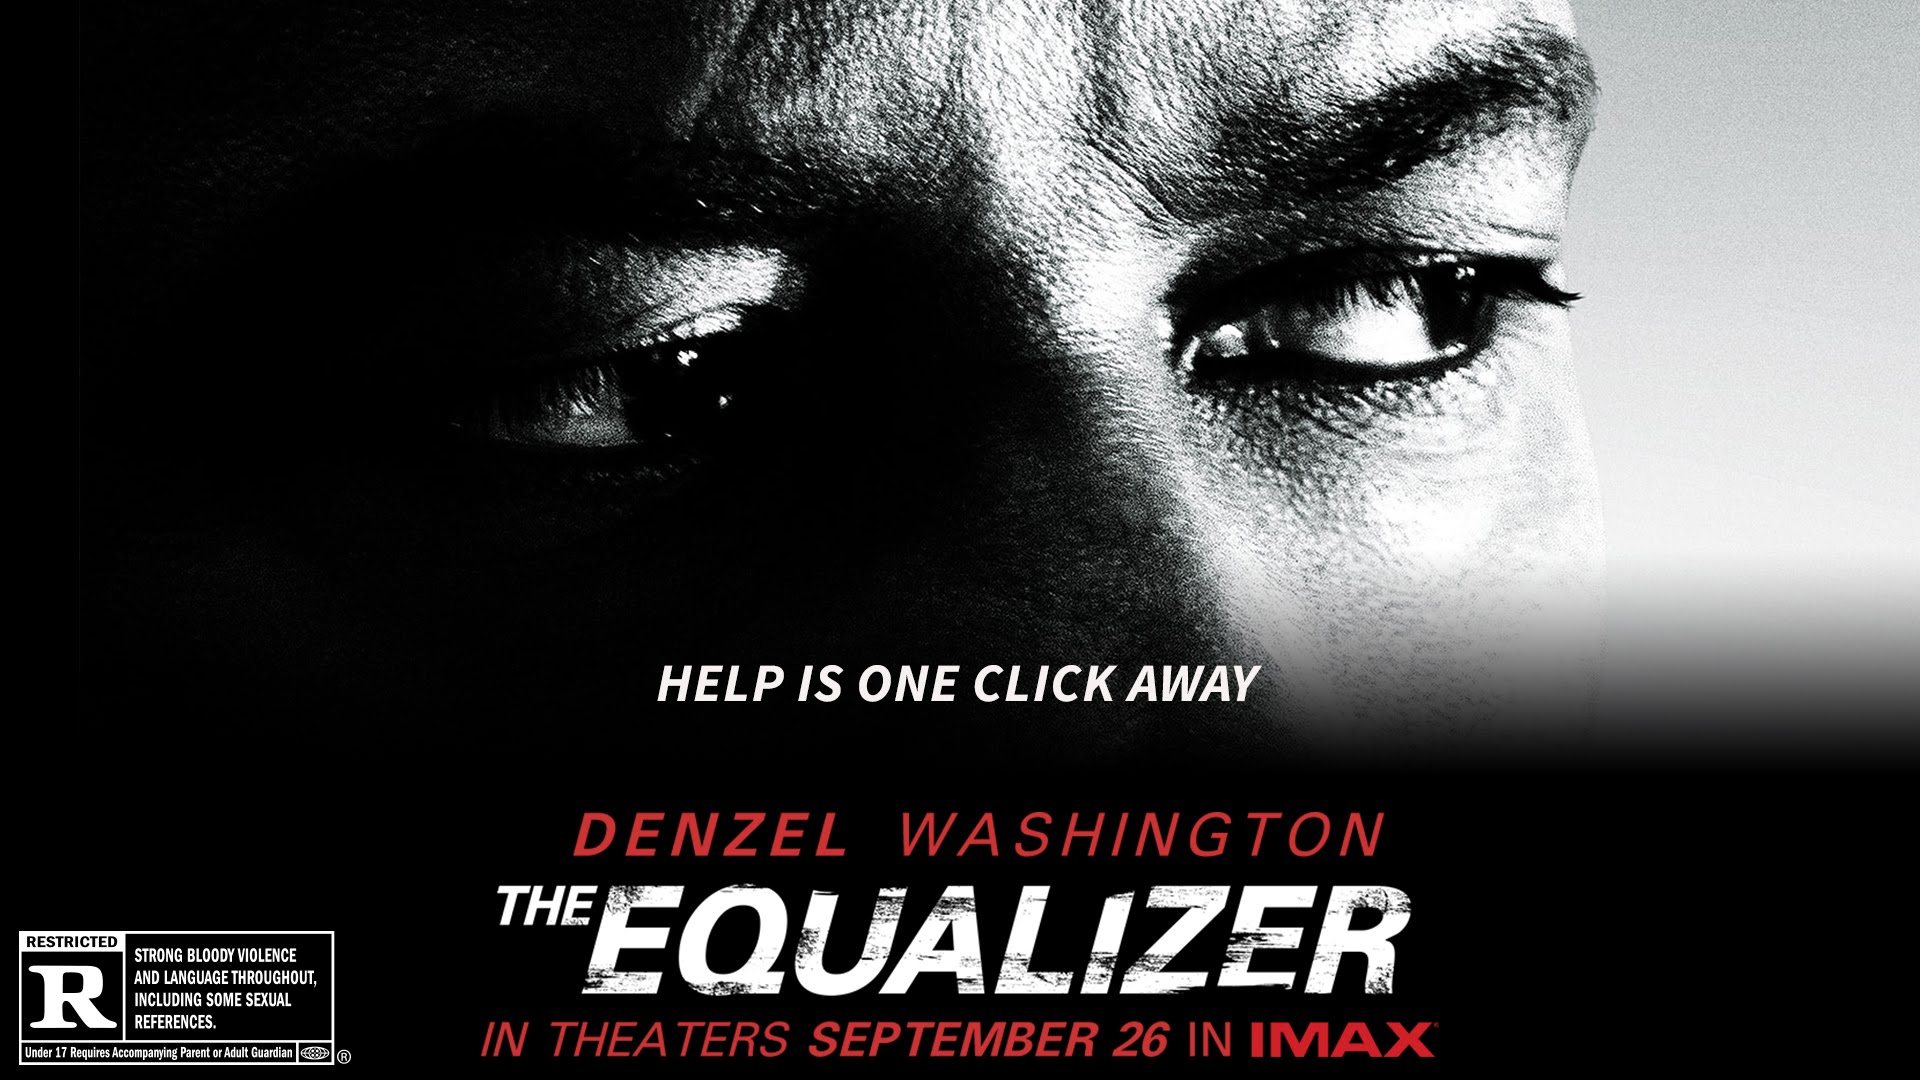 The Equalizer HD wallpapers, Desktop wallpaper - most viewed